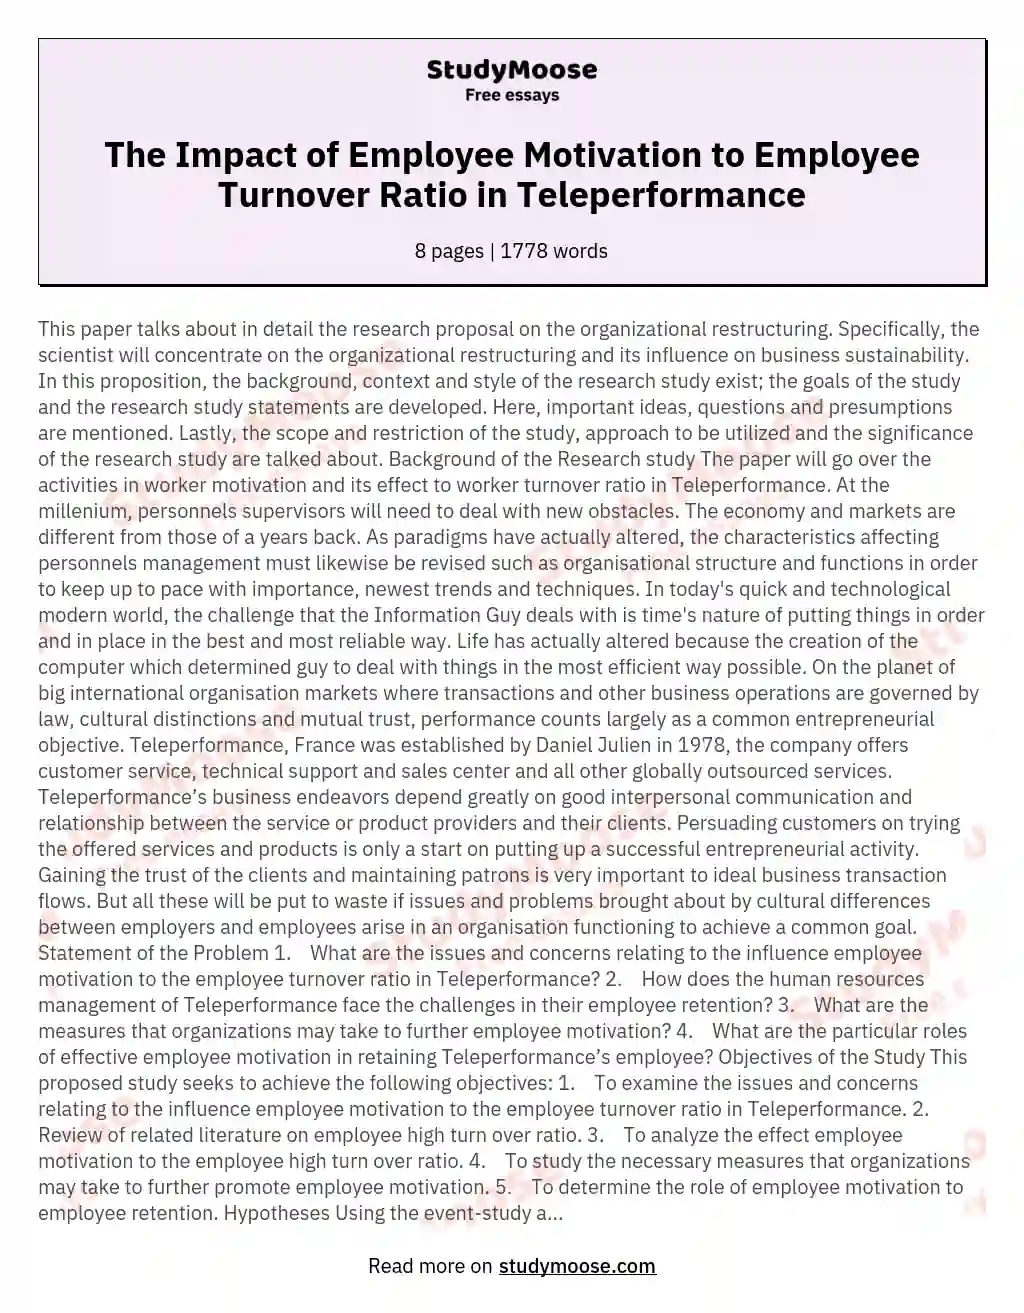 The Impact of Employee Motivation to Employee Turnover Ratio in Teleperformance